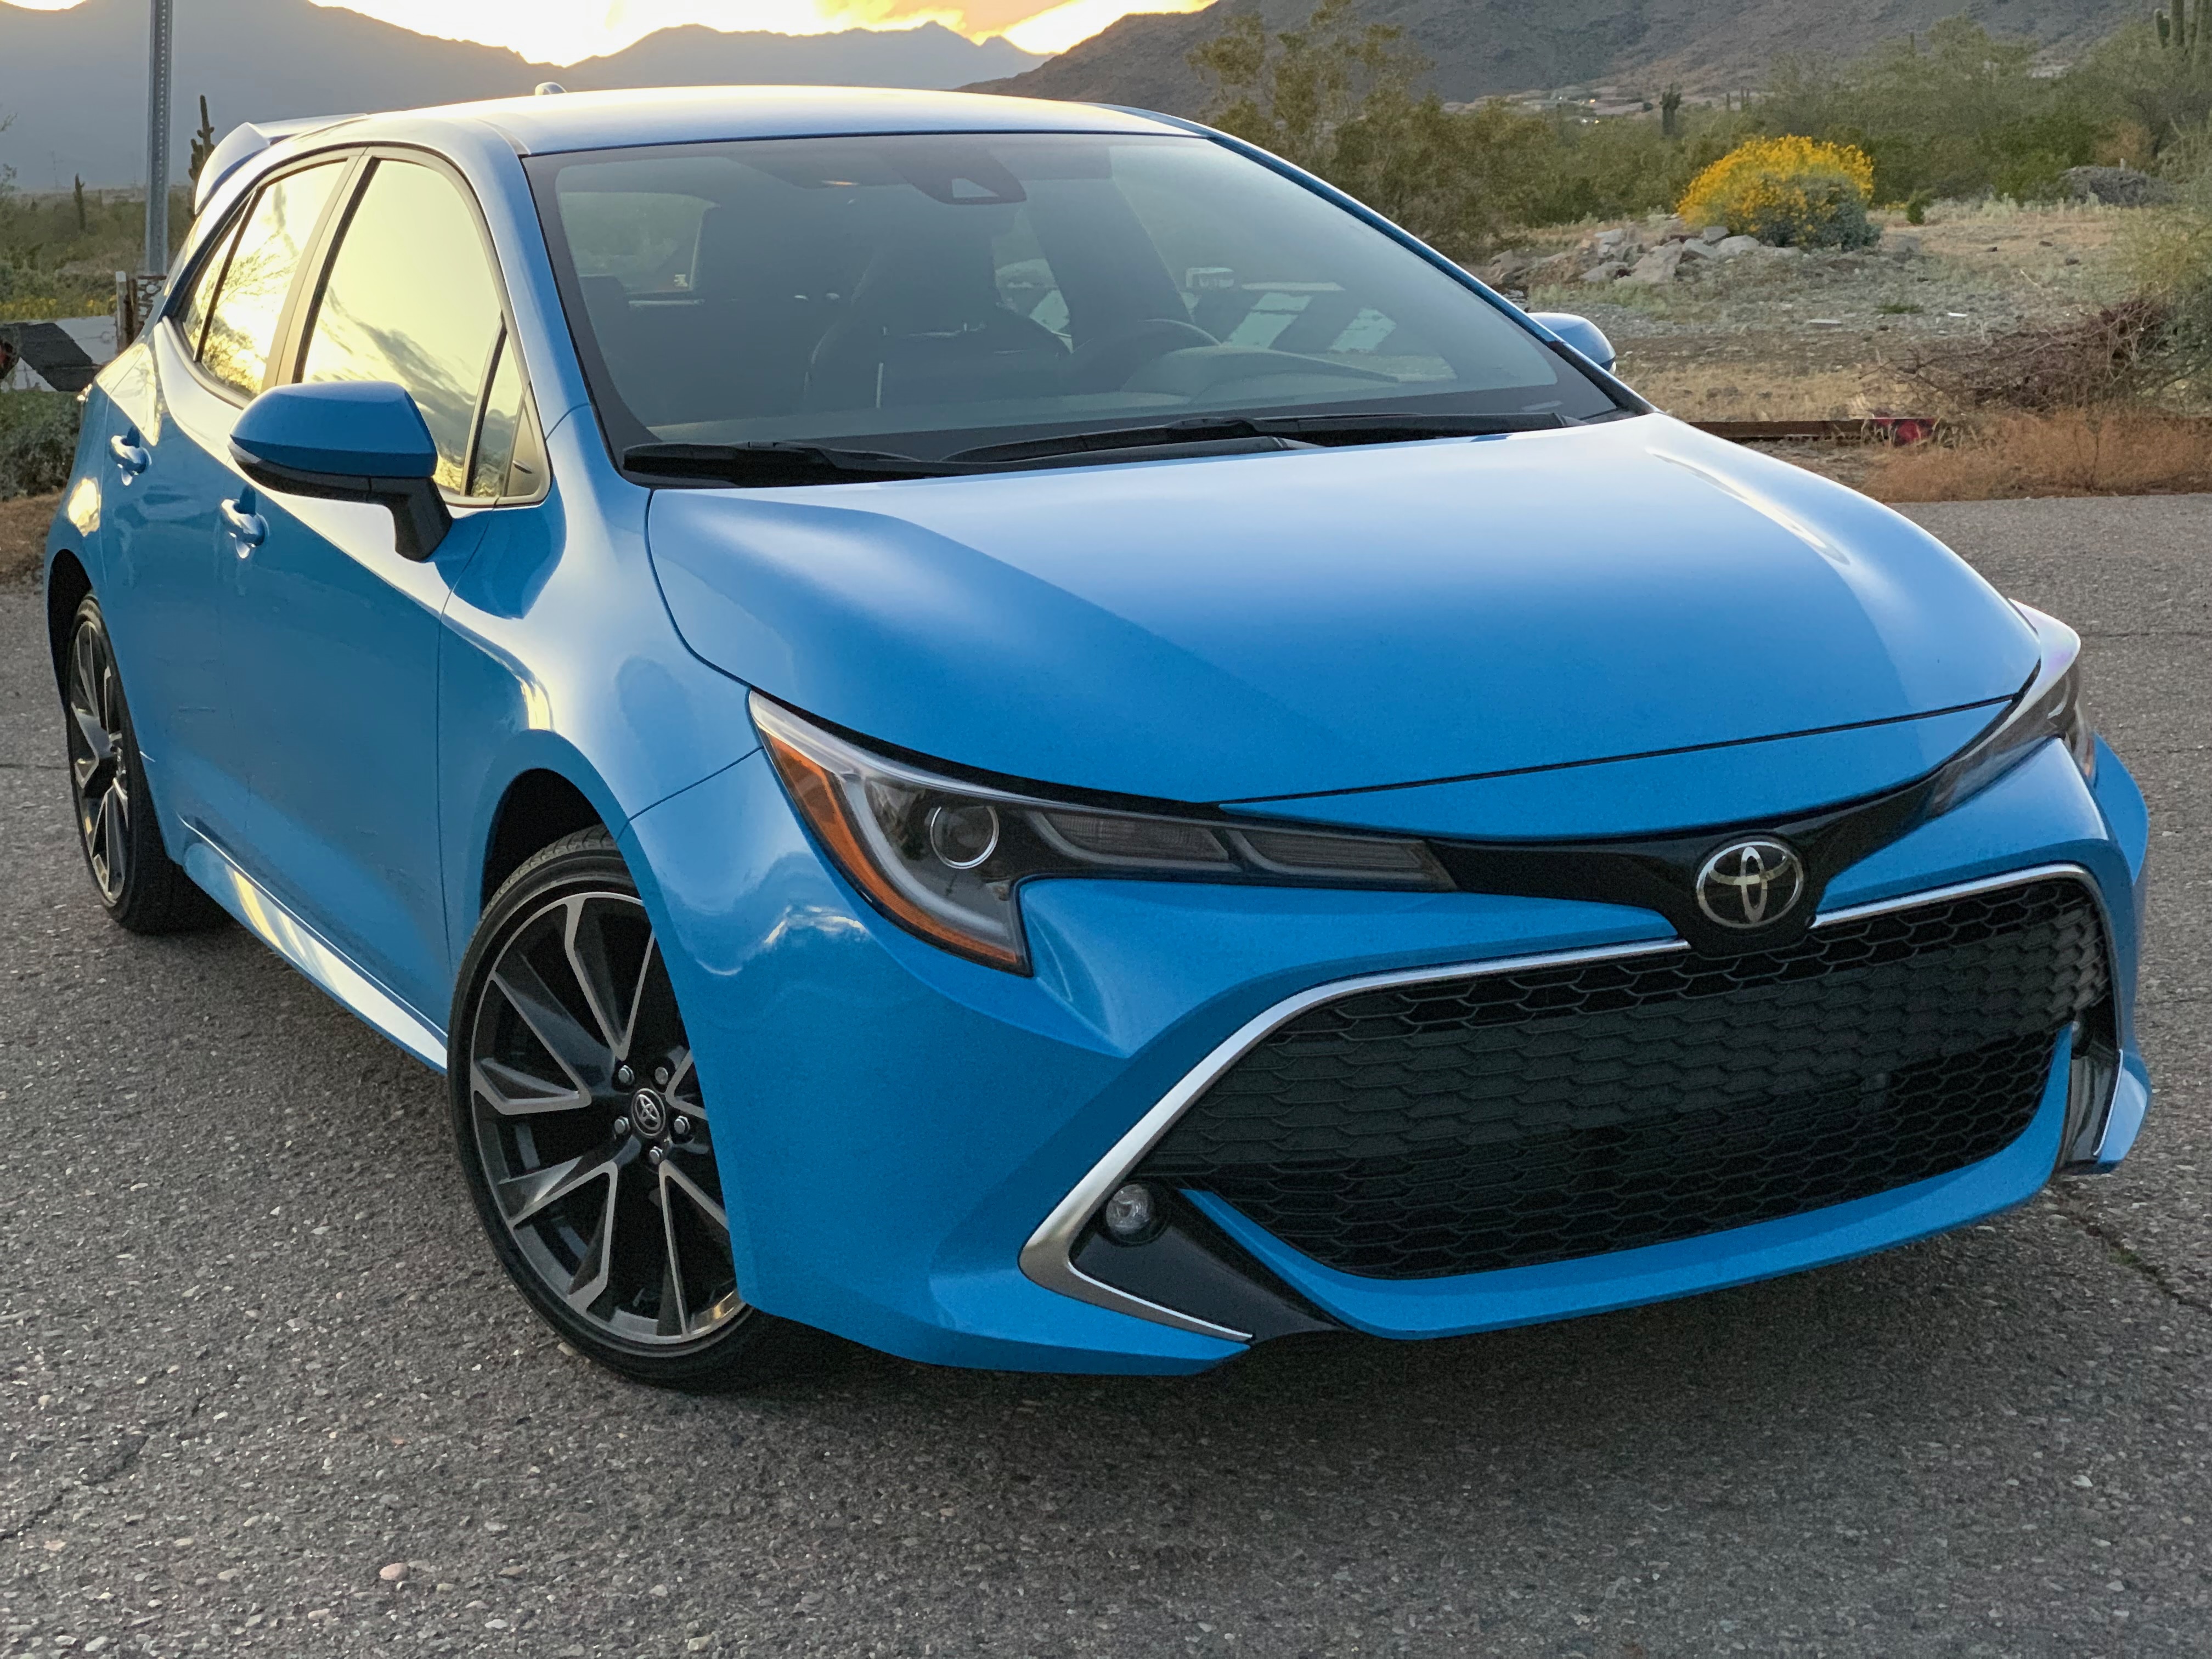 The look of the new Corolla just plain works.